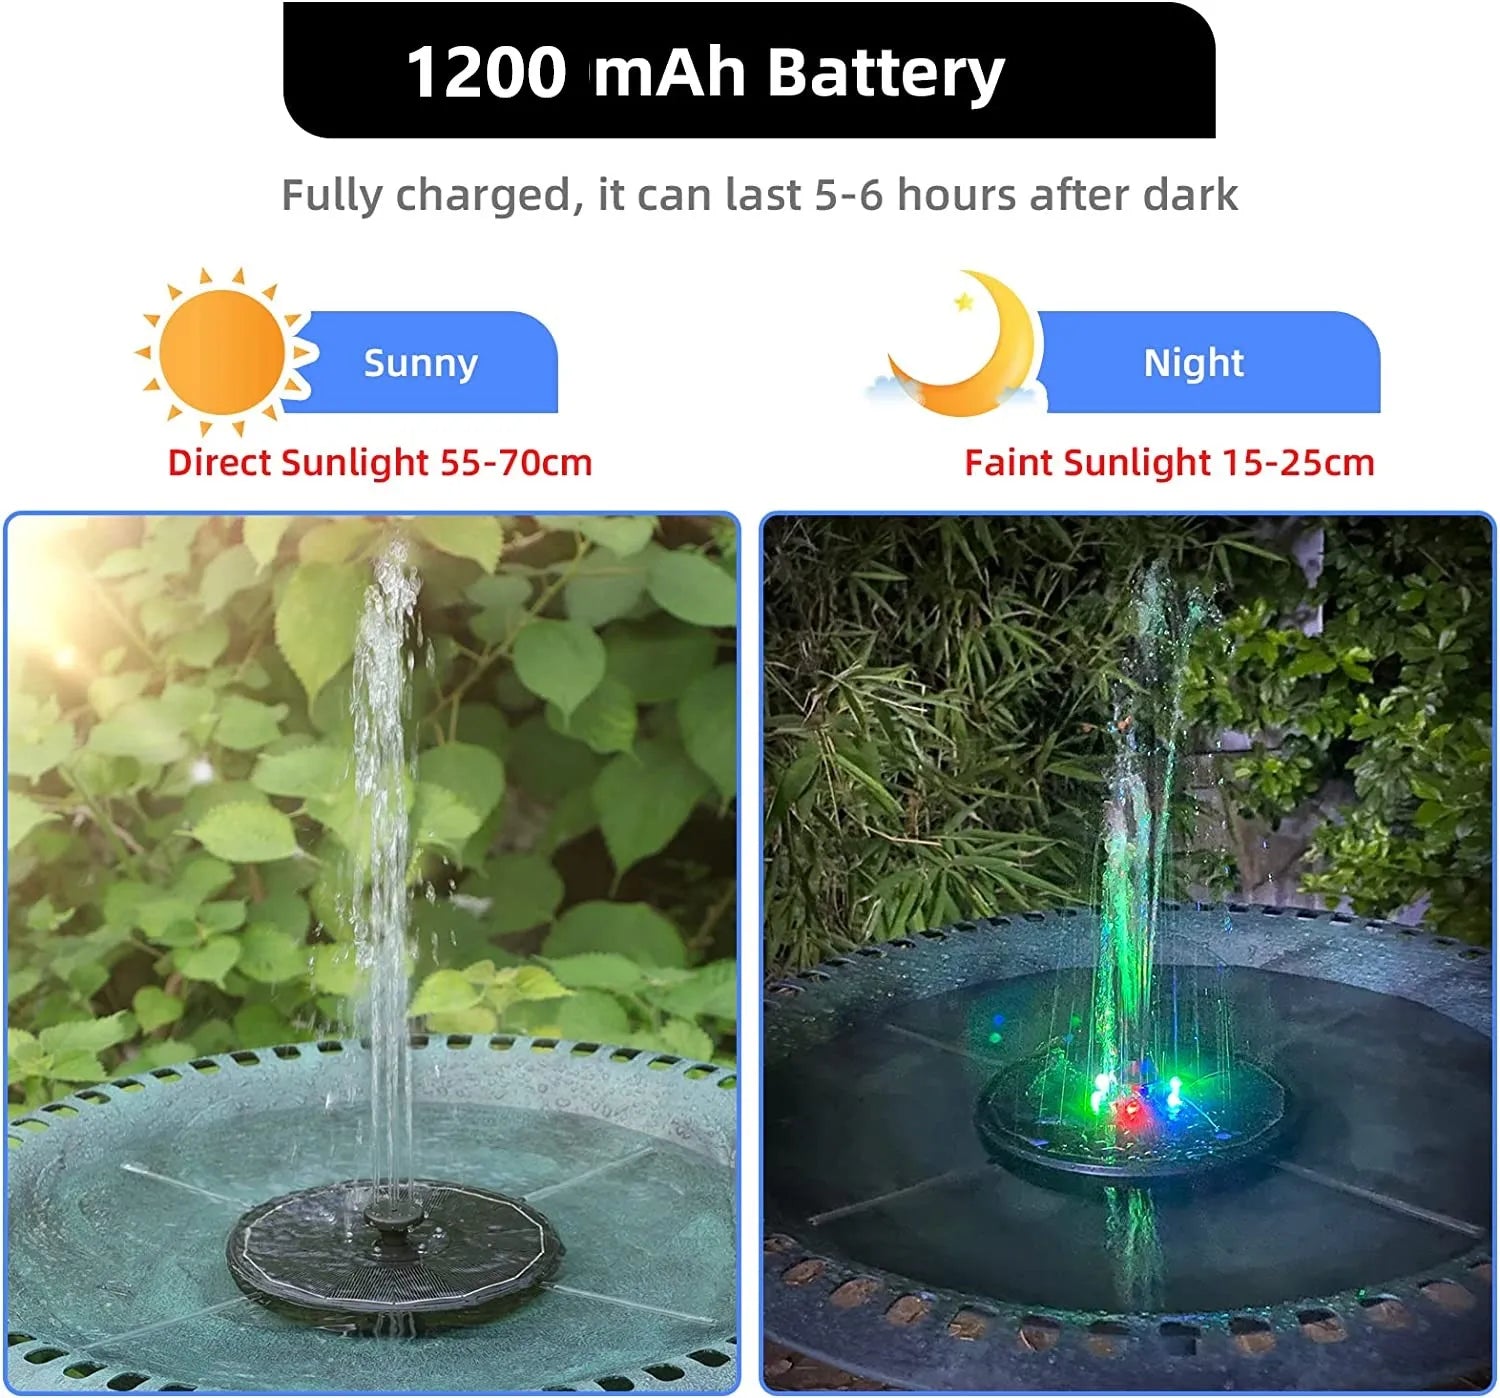 3W Solar Fountain, Runs up to 5-6 hours on 1200mAh battery with direct sunlight; shorter duration possible under faint sunlight.